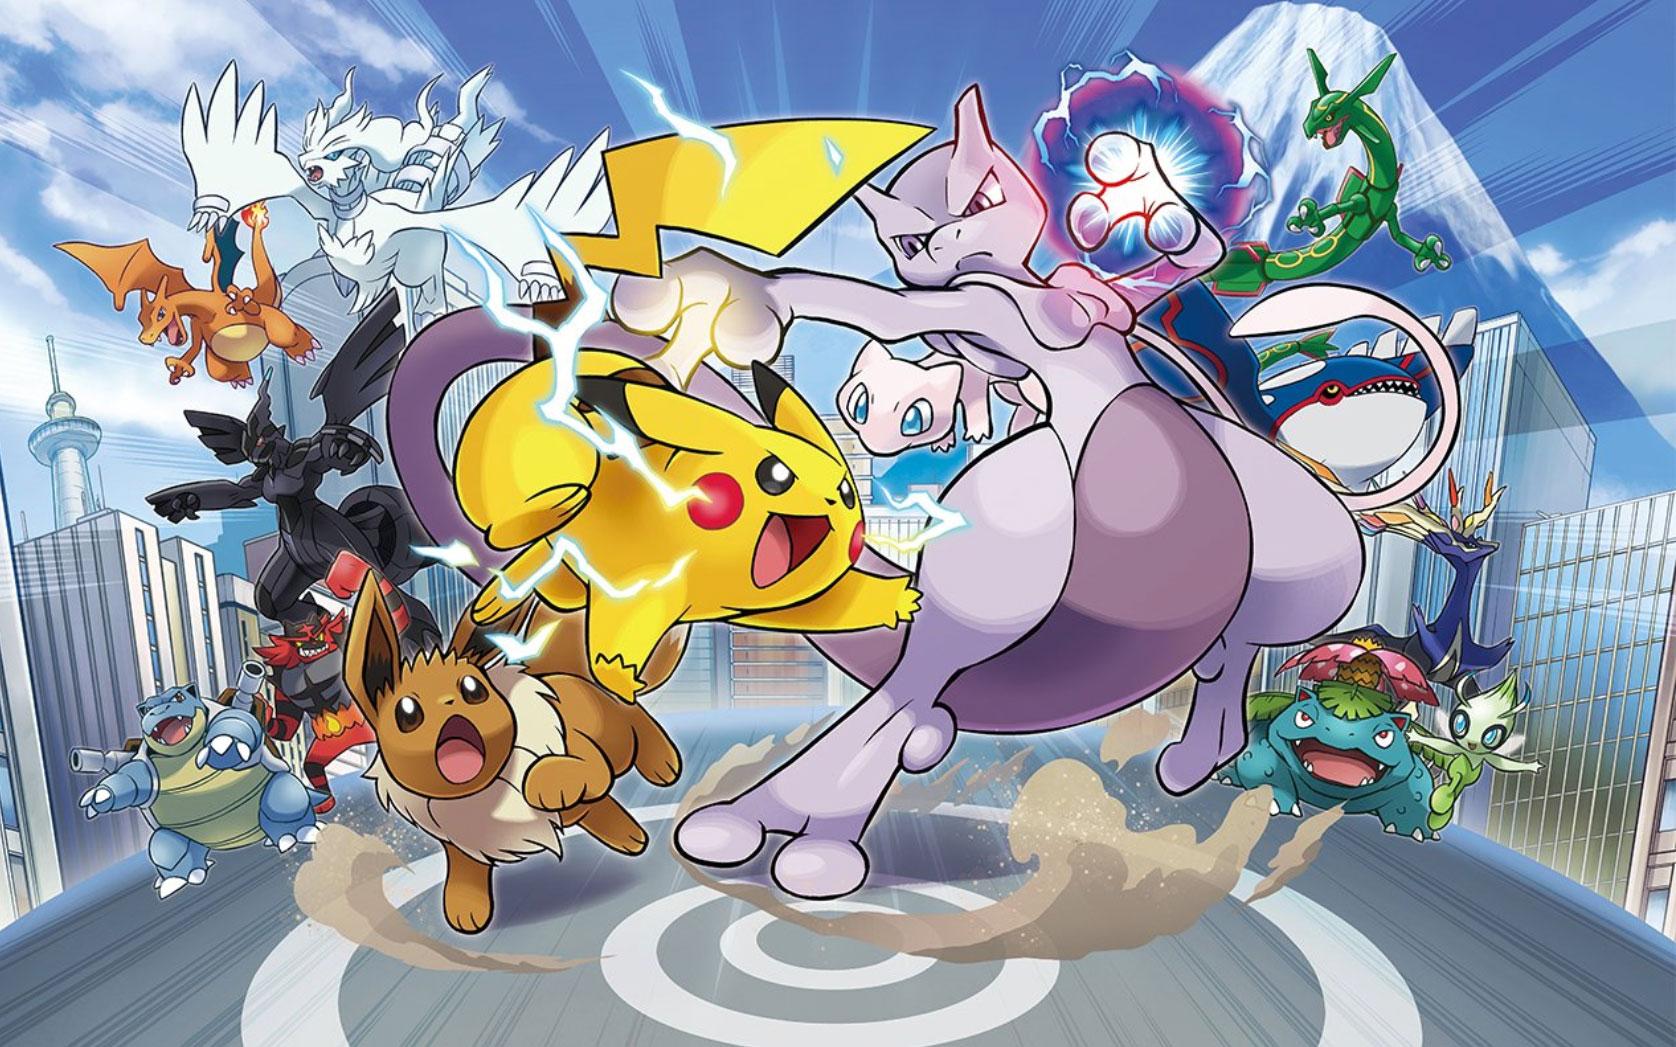 Sword & Shield Becomes Second Best-Selling Pokémon Game Of All Time